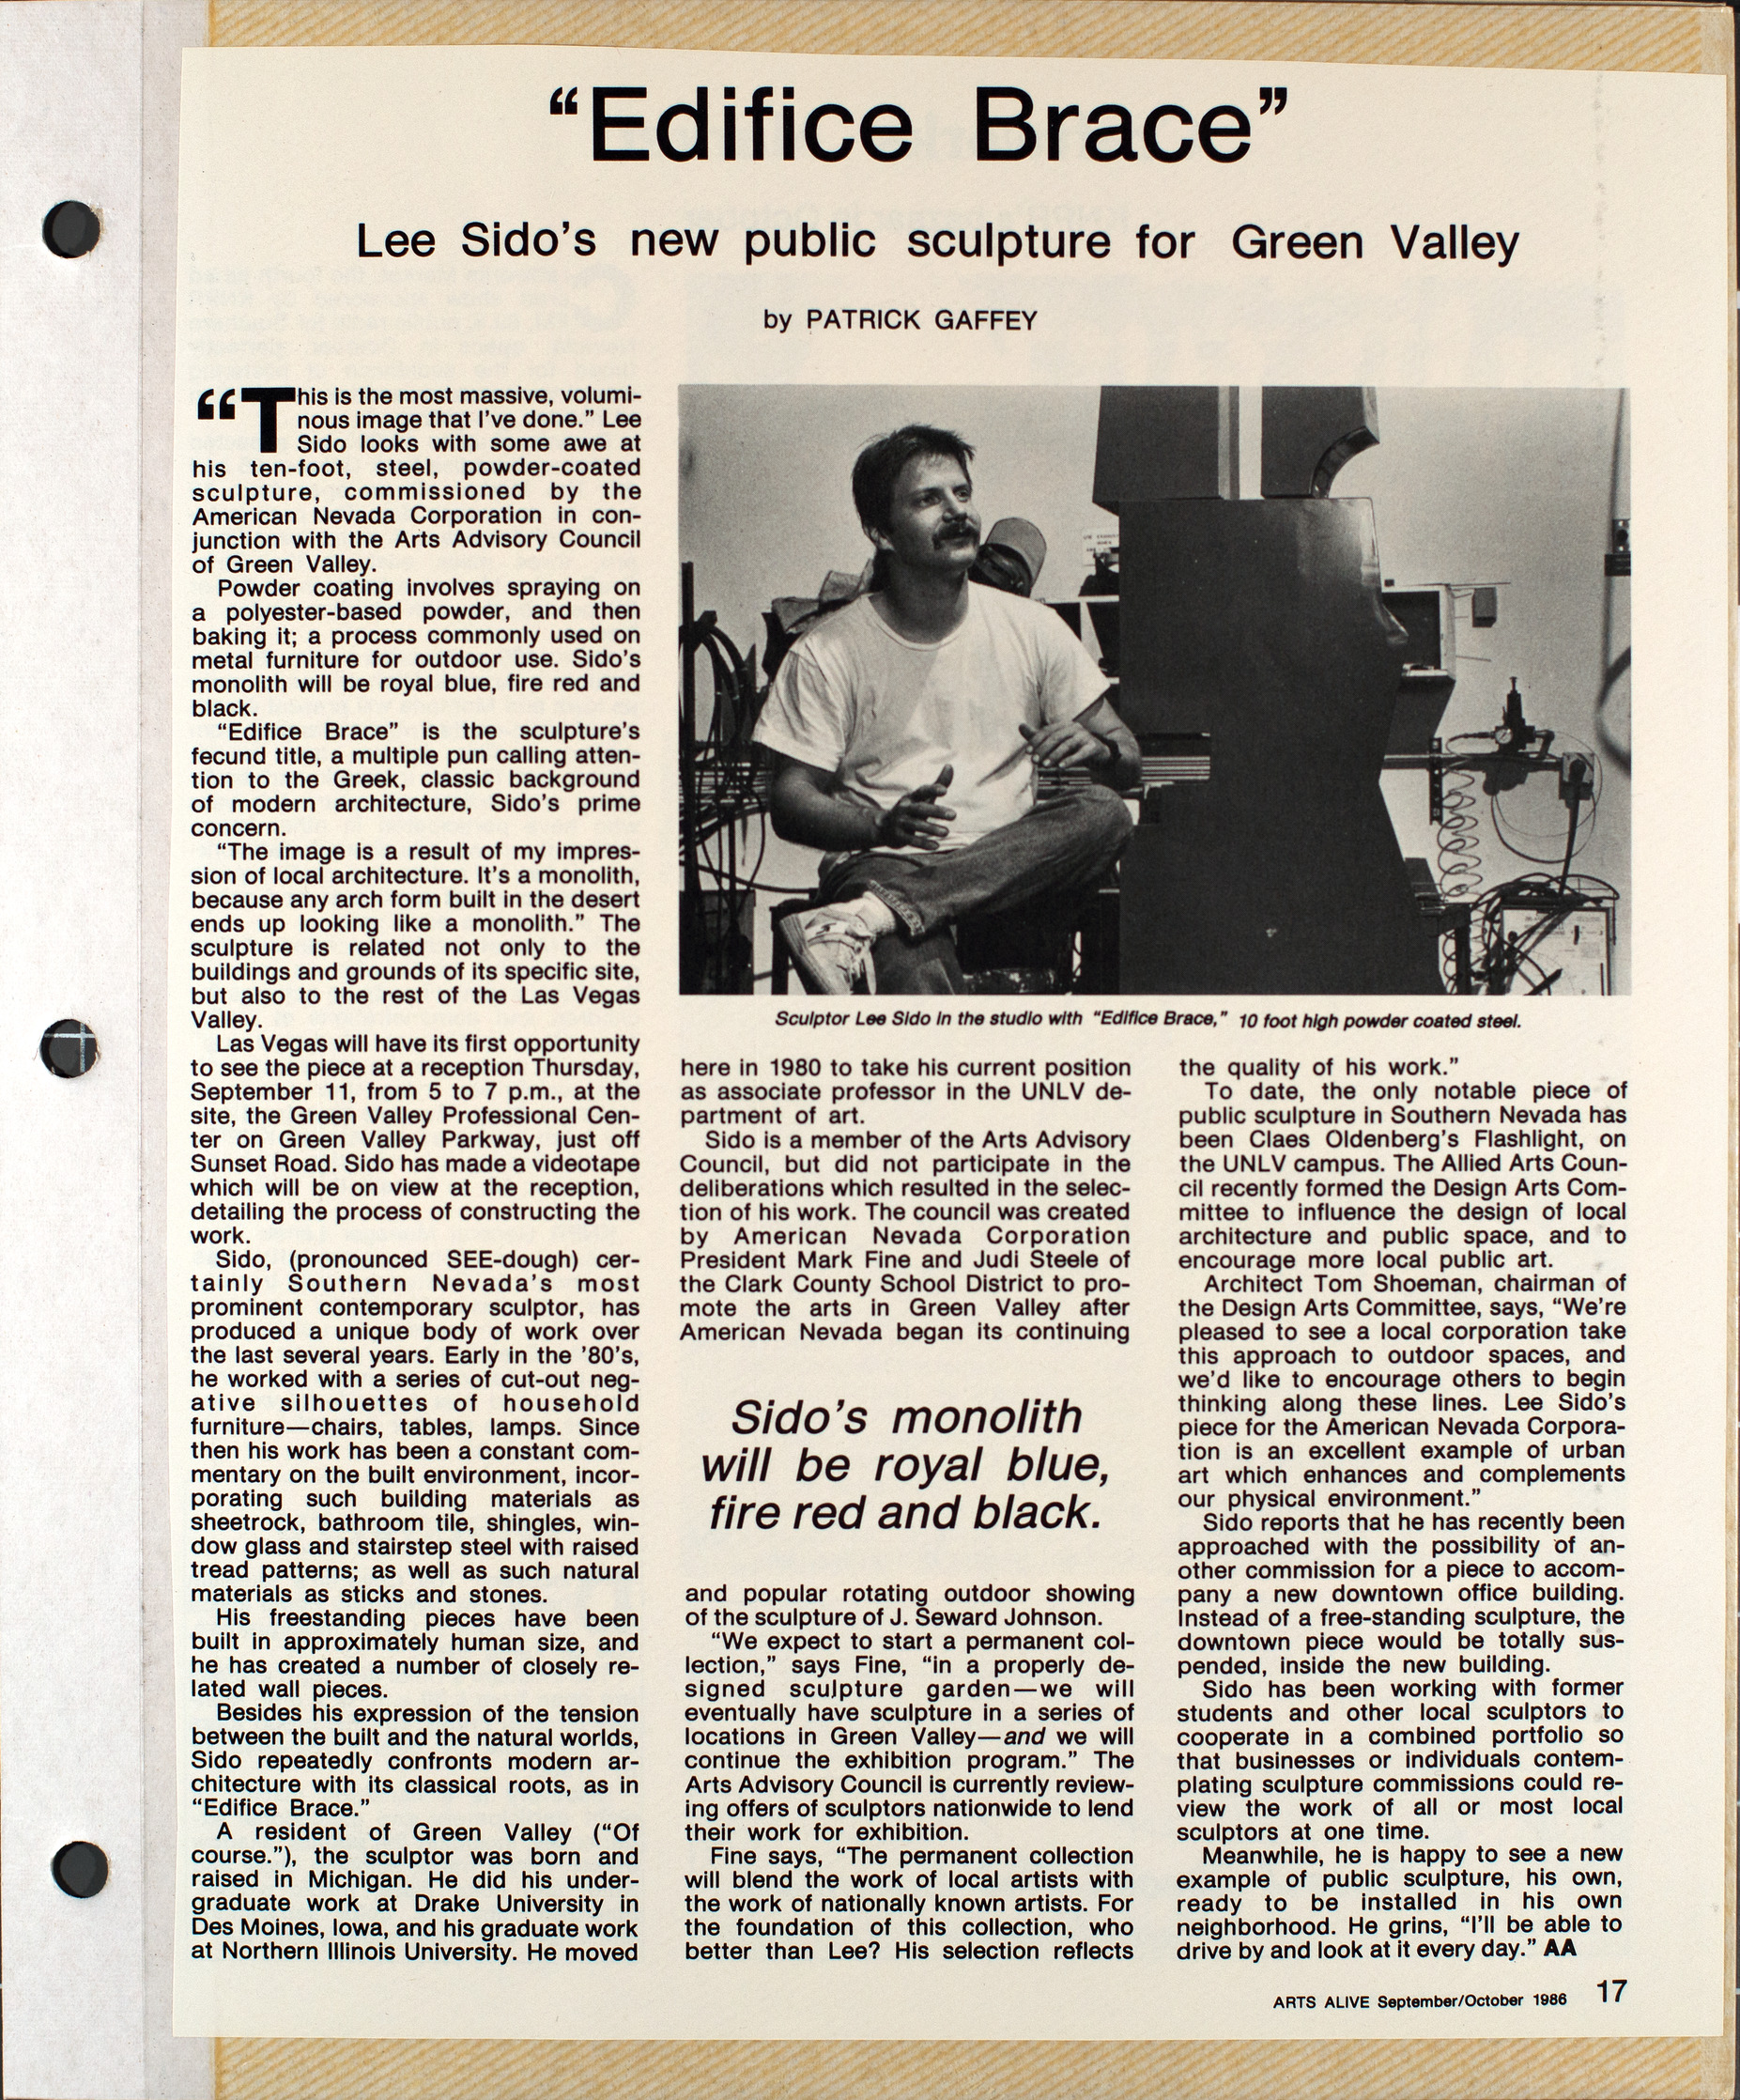 Article, Ediface Brace: Lee Sido's new public sculpture for Green Valley, Arts Alive, September-October 1986